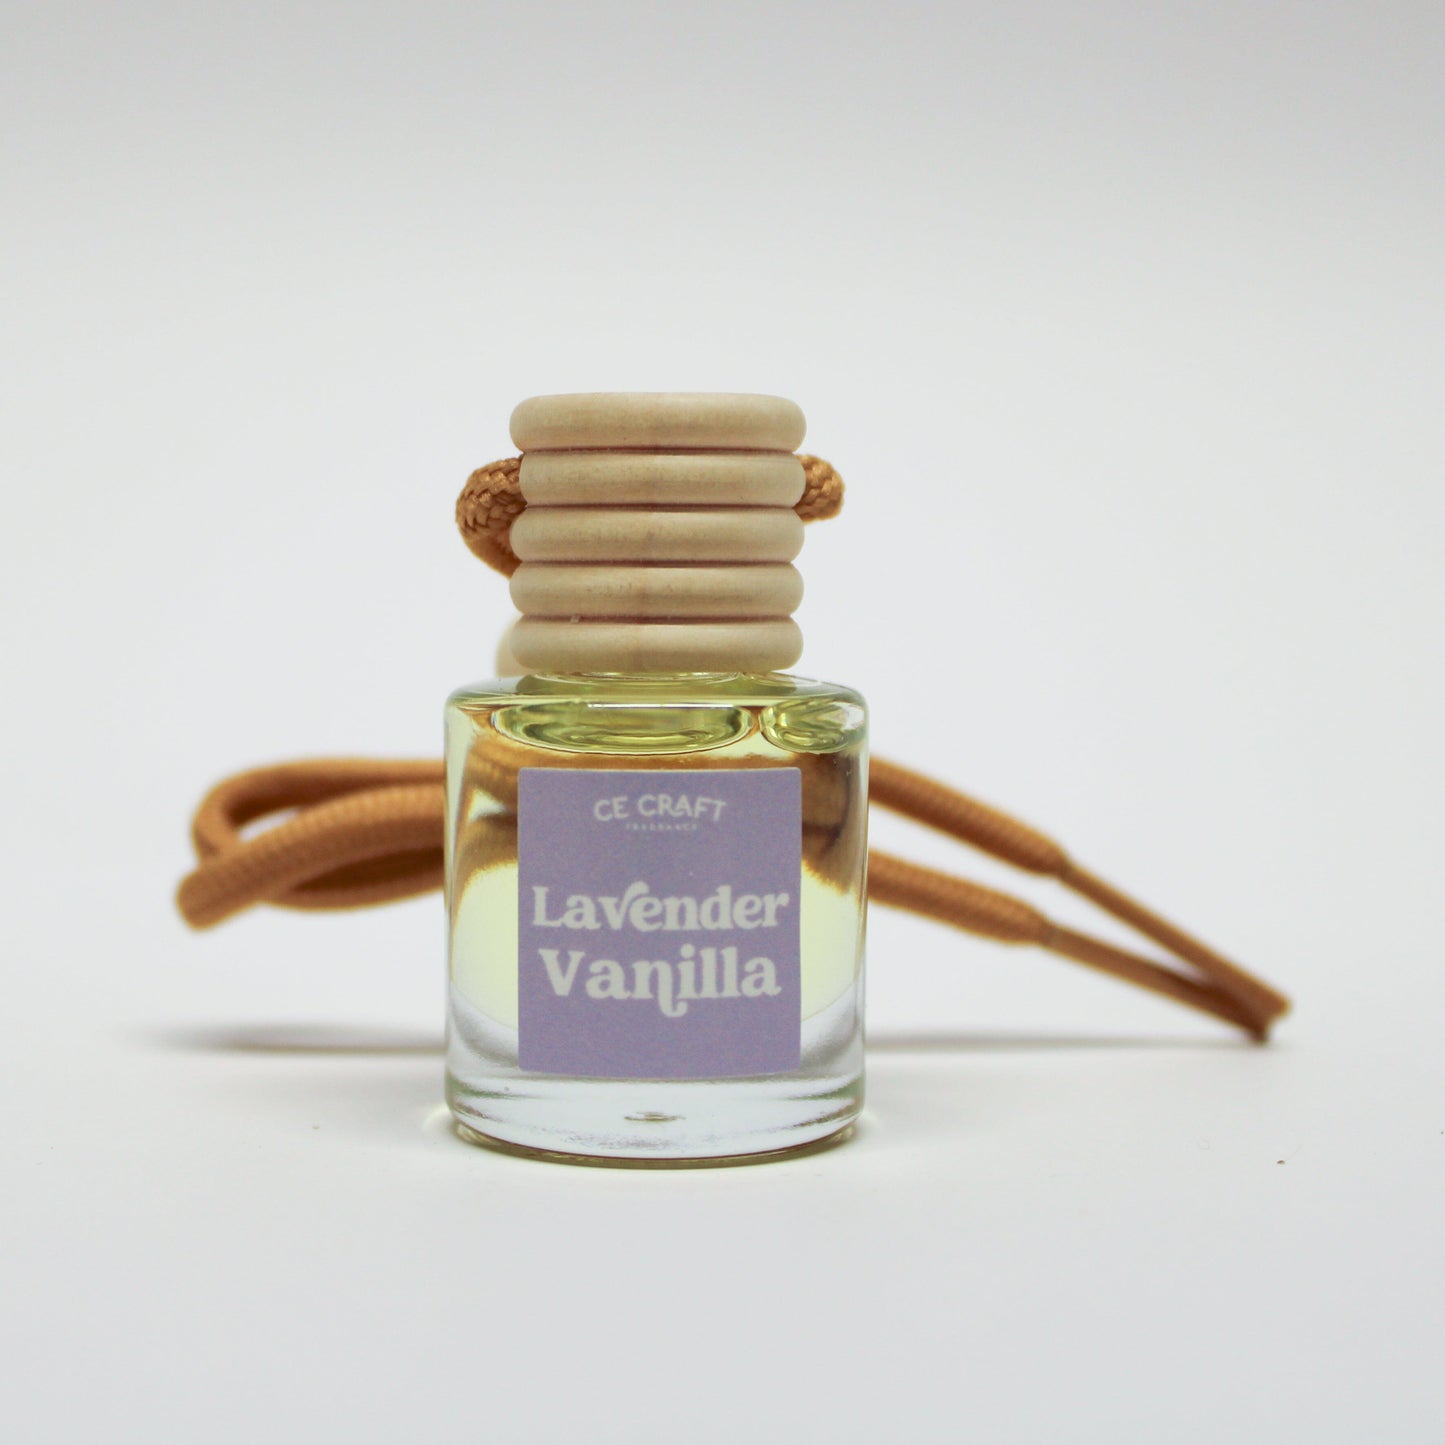 Scented Car Freshener - Car Air Diffuser - Long Lasting Fragrance for Car Vehicle Air Fresheners CE Craft Lavender Vanilla 